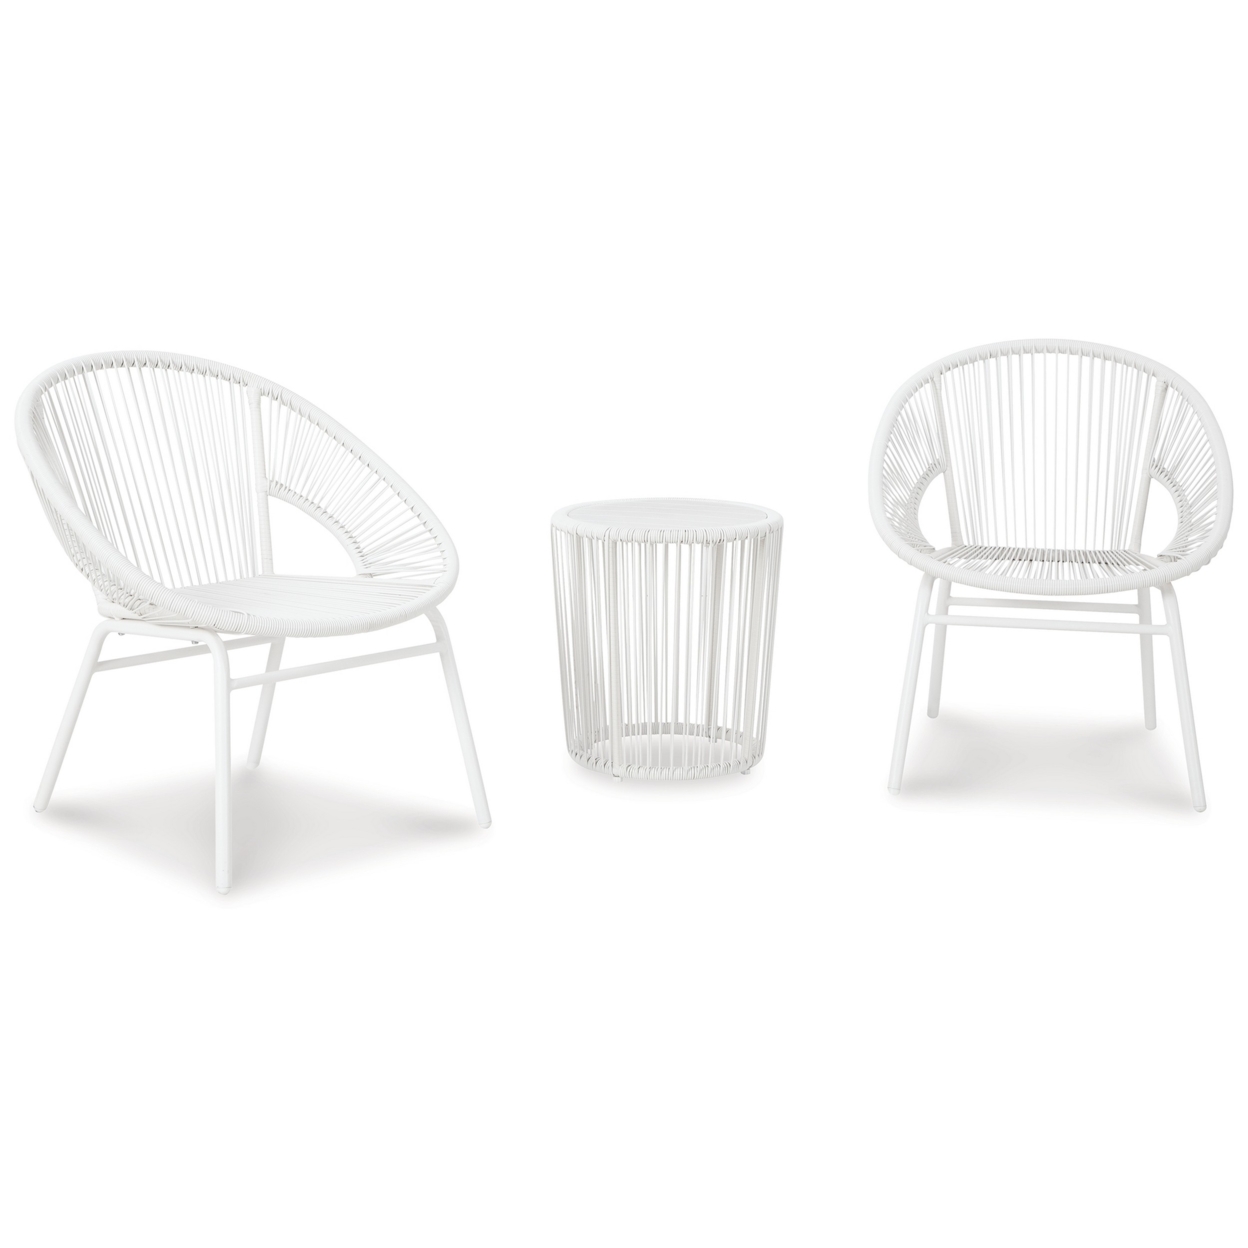 Hely 3 Piece Outdoor Table And Chairs Set, White All Weather Resin Wicker- Saltoro Sherpi